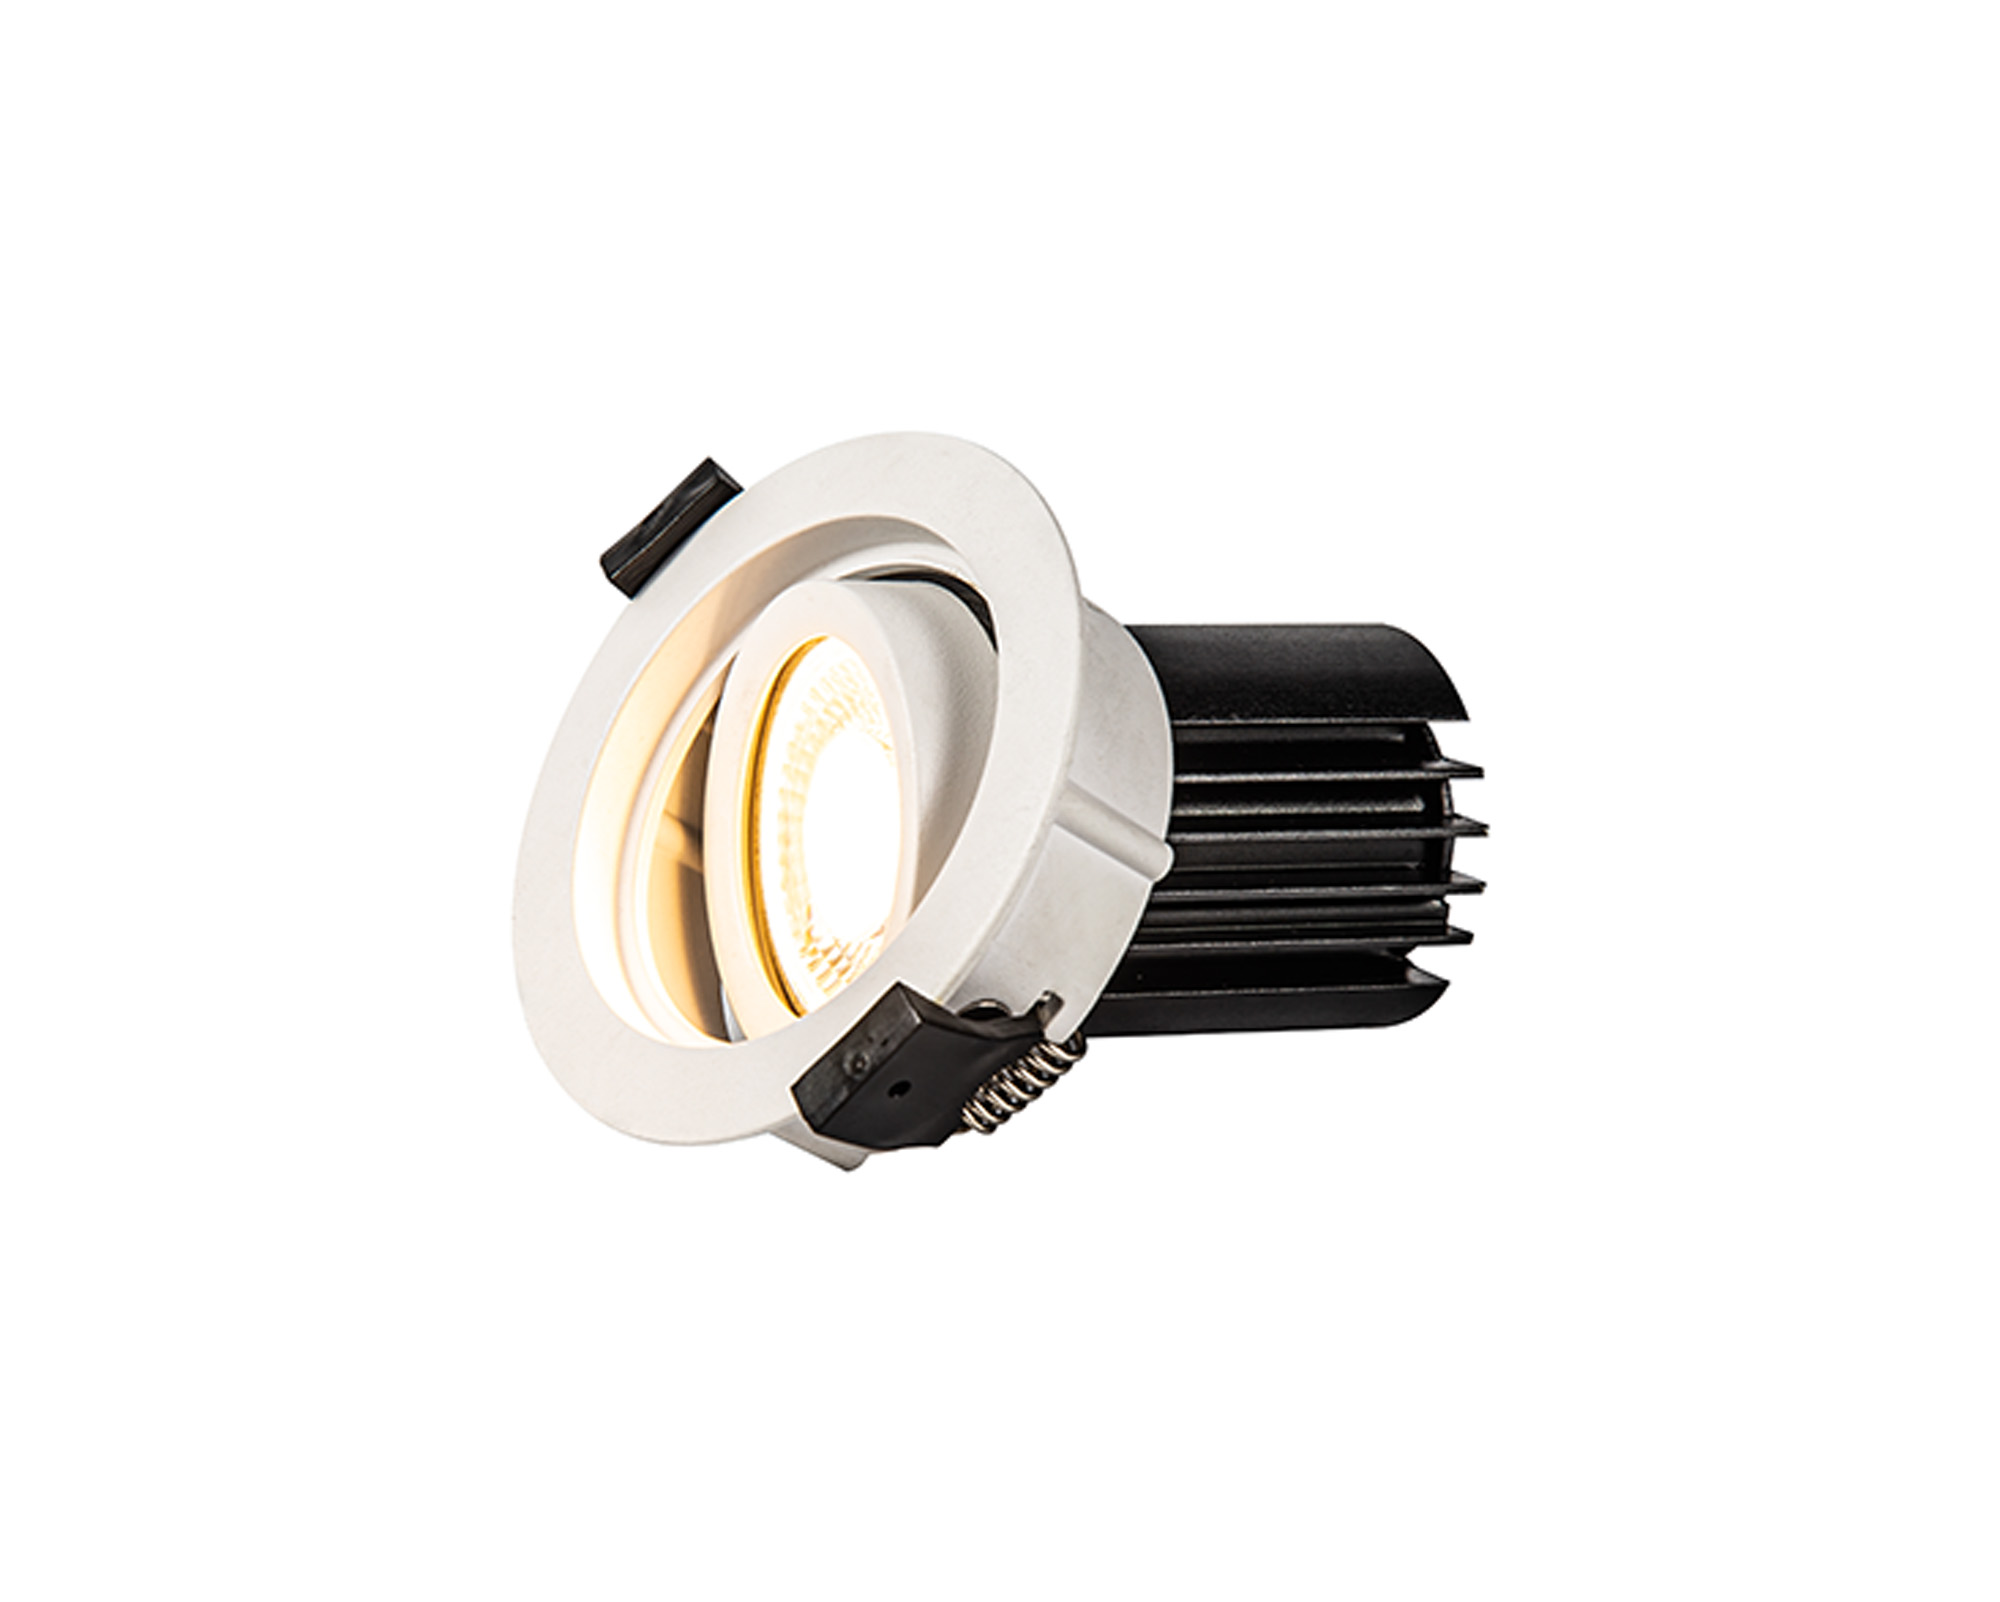 DM202339  Beppe A 12 Tridonic Powered 12W 2700K 1200lm 12° CRI>90 LED Engine White Stepped Adjustable Recessed Spotlight, IP20